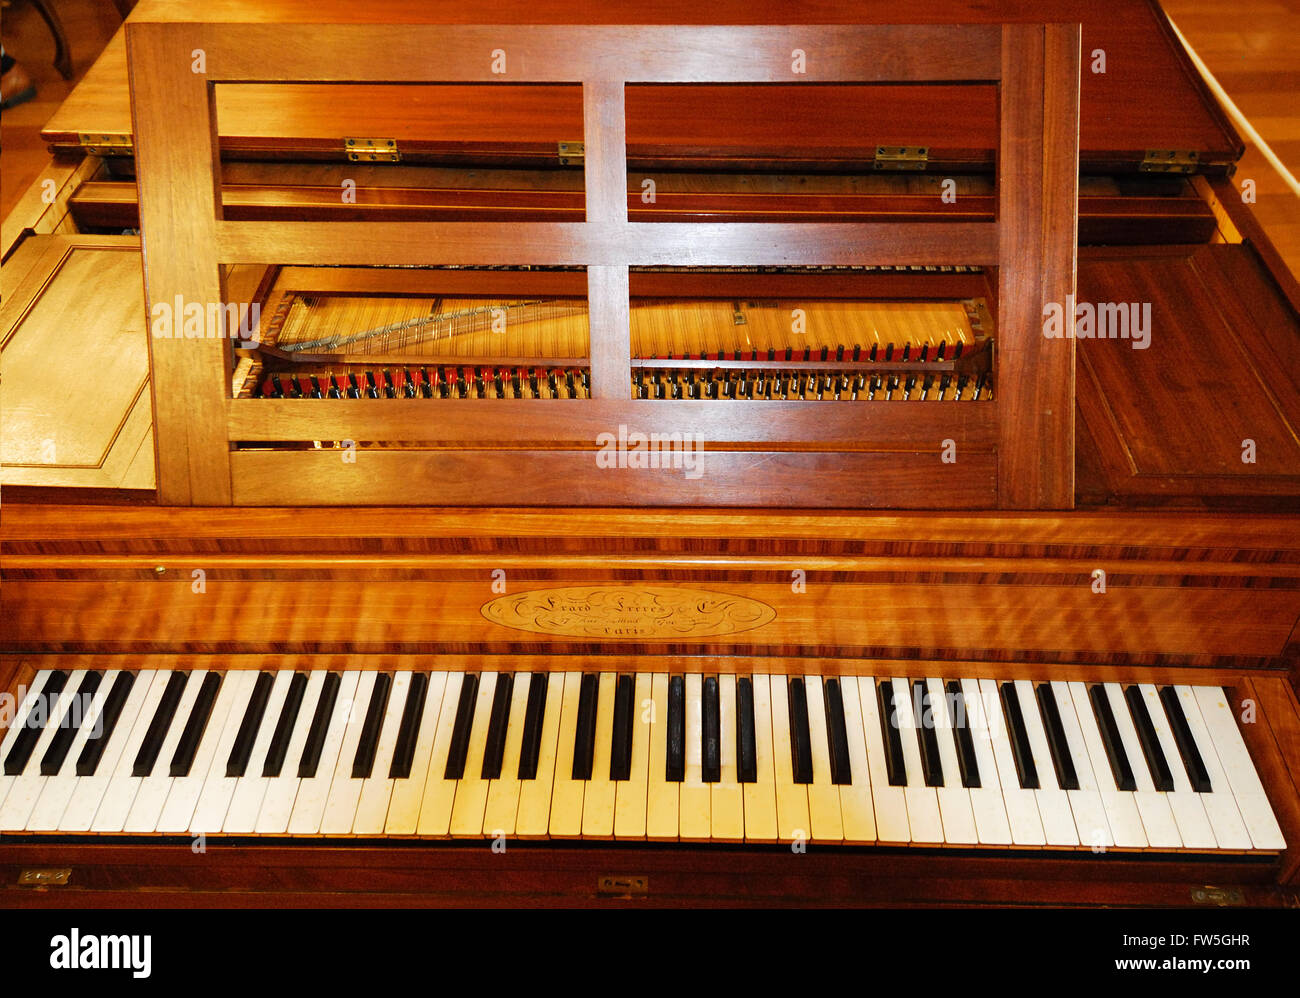 Pianoforte - (in form of harpsichord) by Erard Frères, Paris, 1790. Bought by Mme Bartholdi, Colmar, December 1837. ‘English Stock Photo